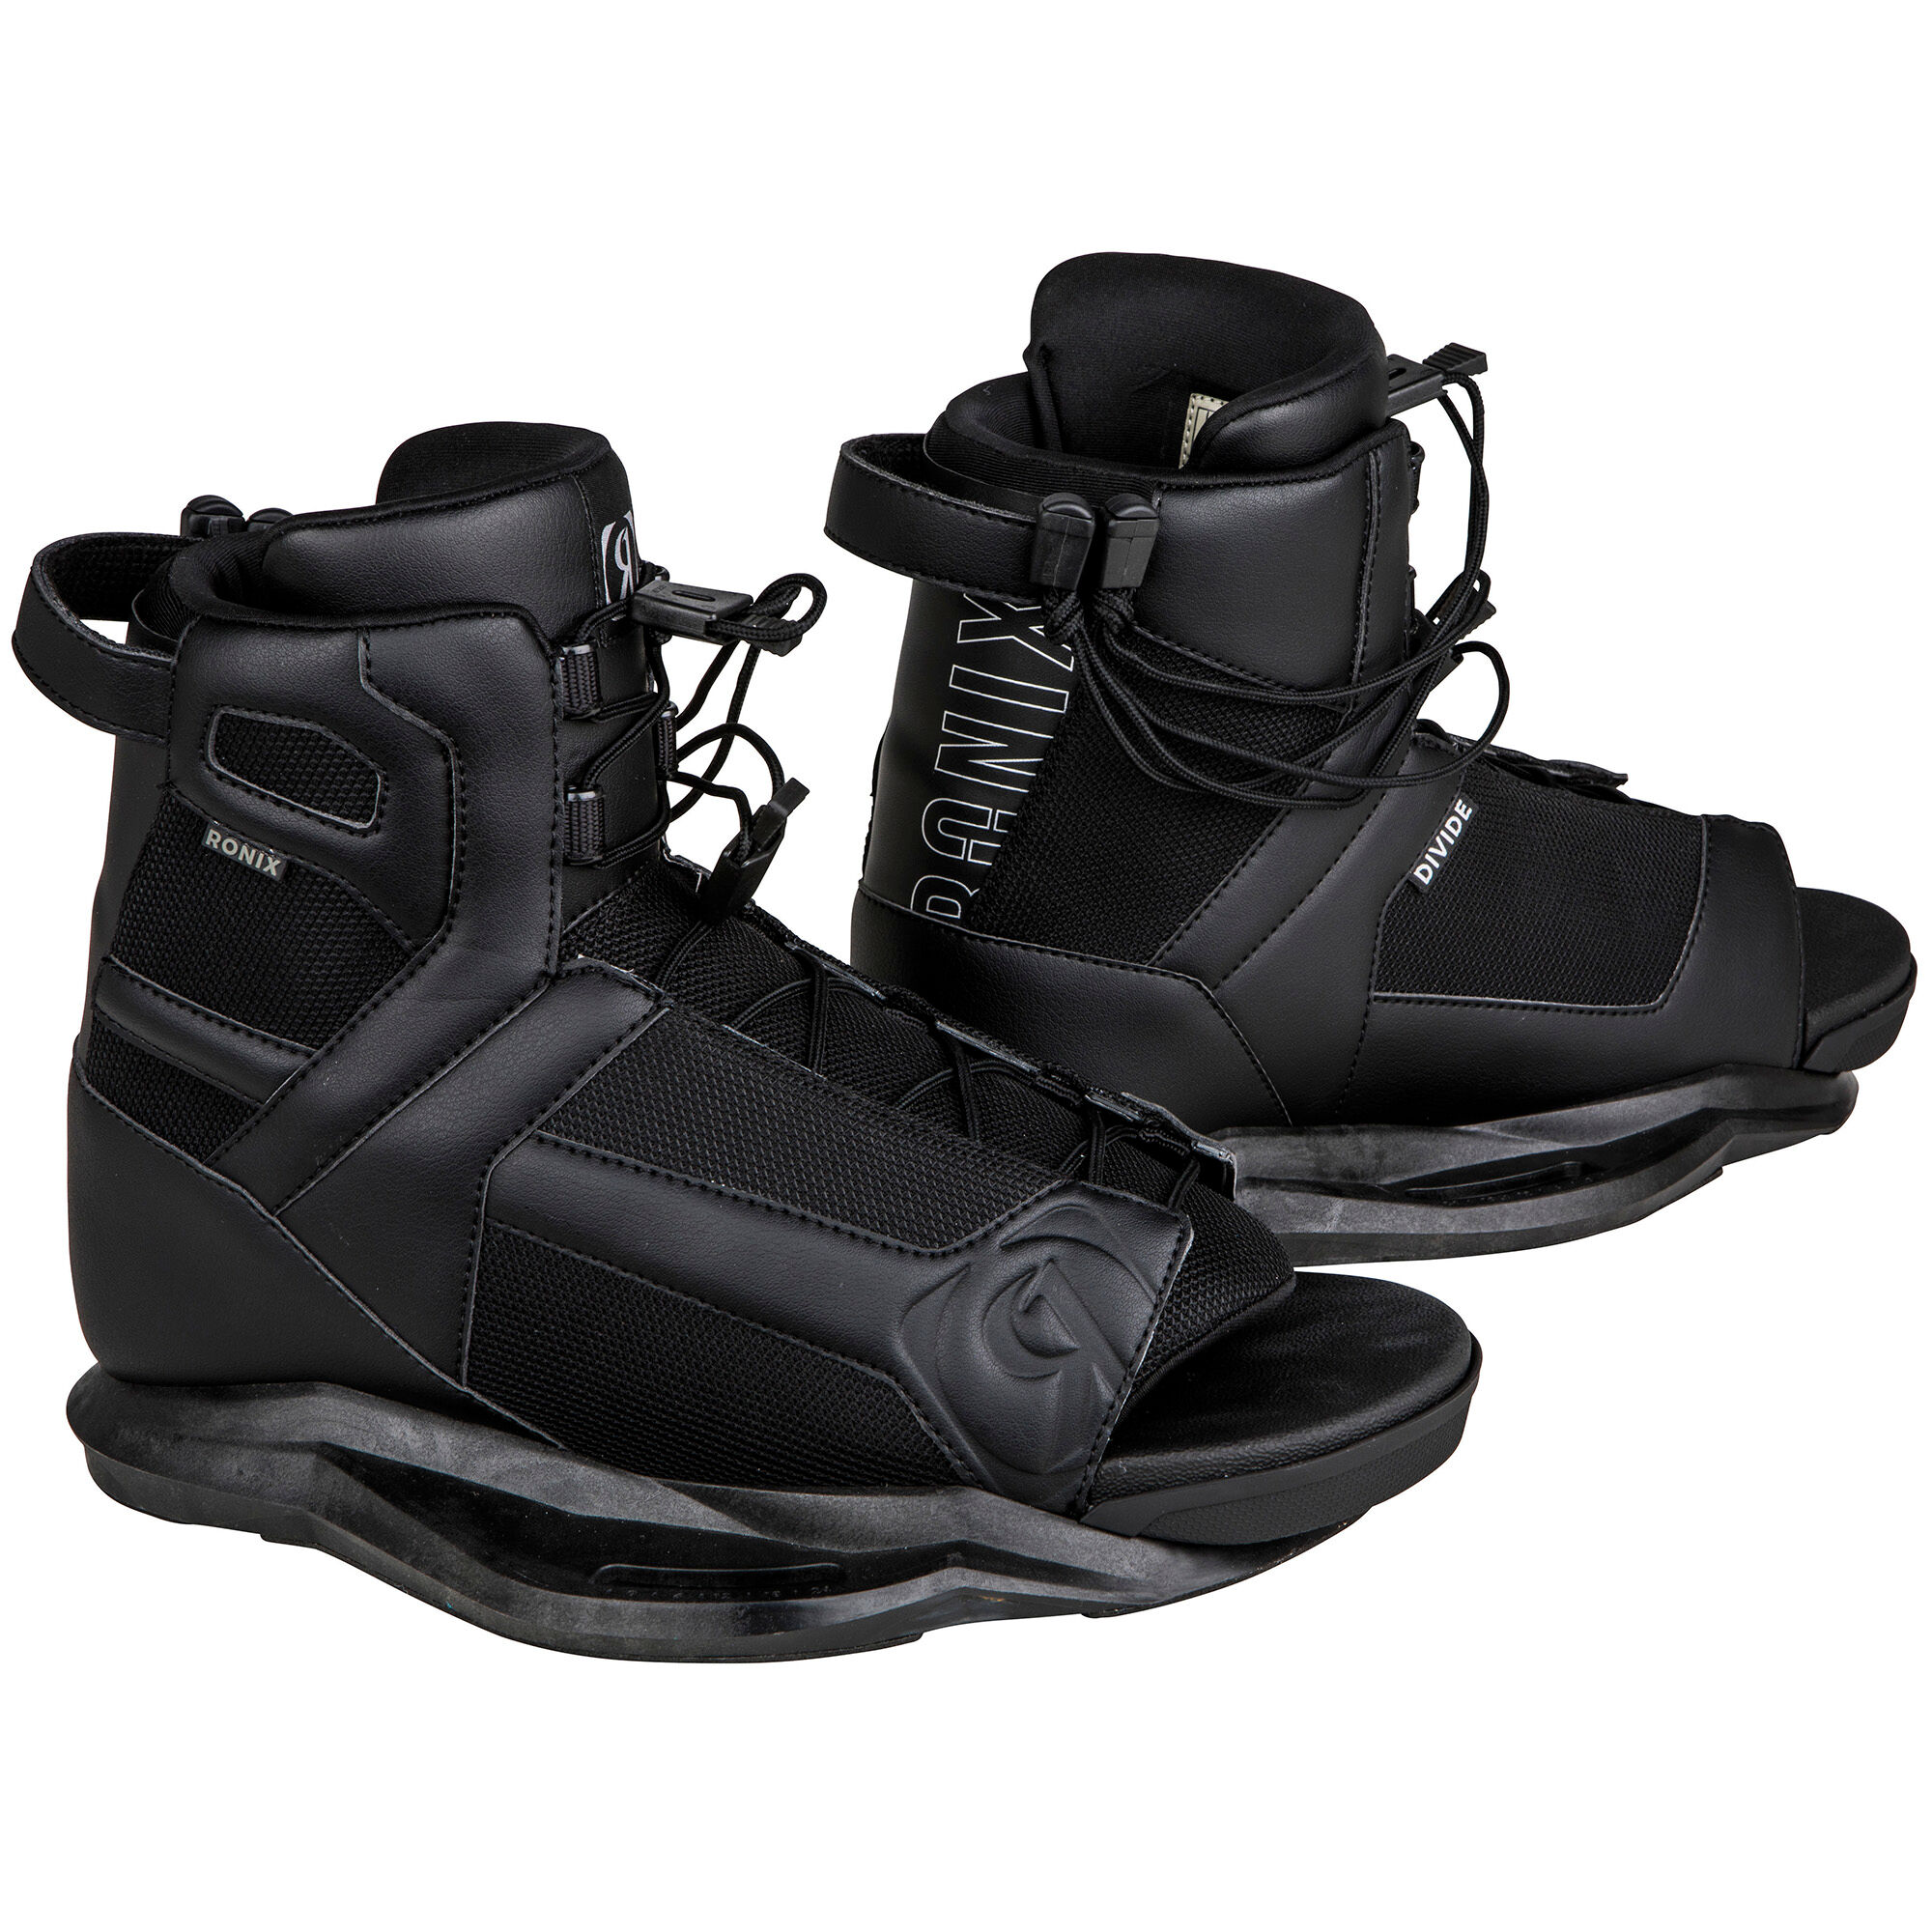 Photos - Other for Swimming Ronix Divide Wakeboard Boots 193123p 